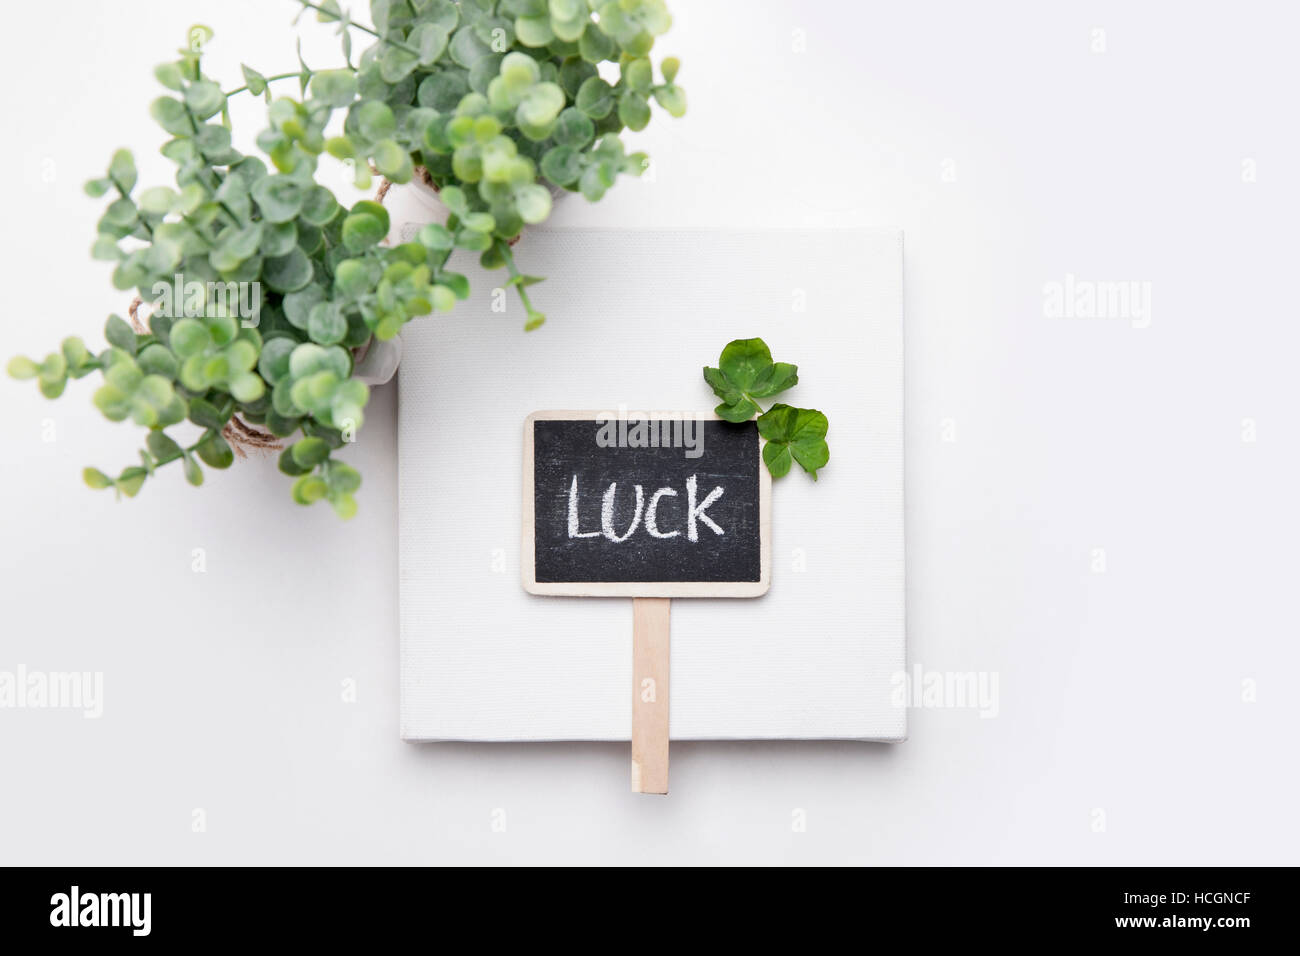 Four-leaf clovers and message of luck on a sign Stock Photo